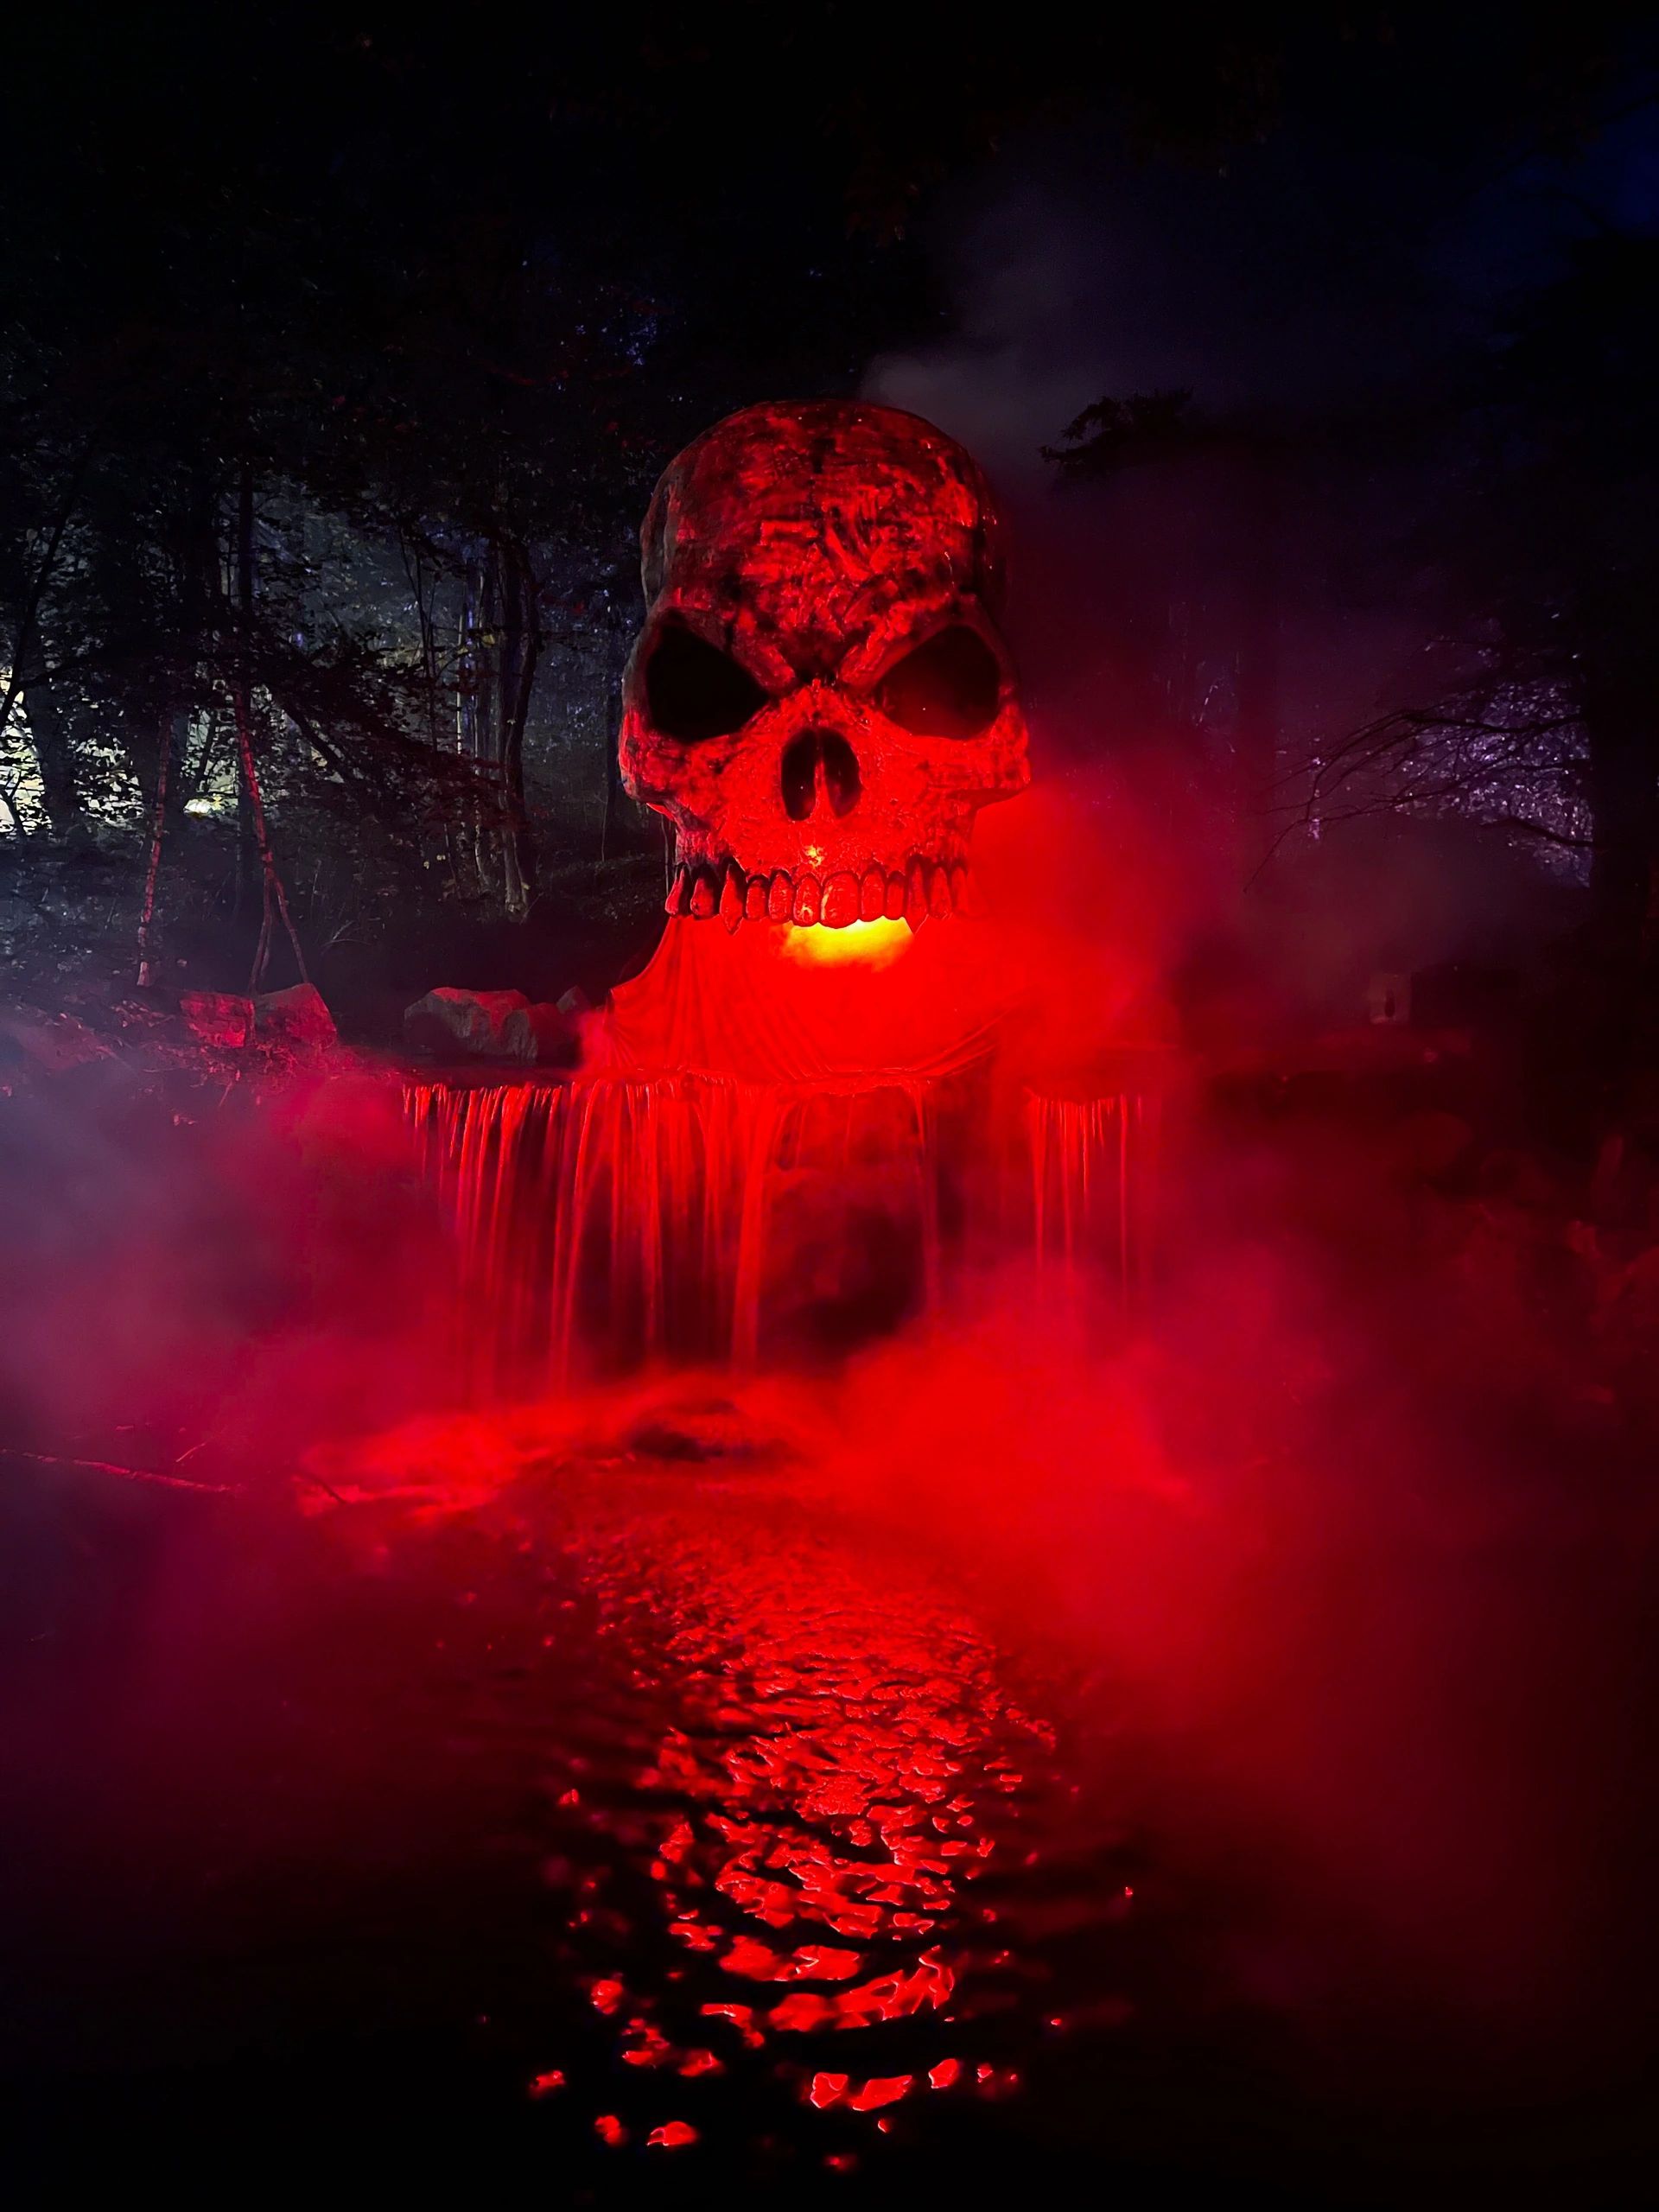 Halloween Haunt is Back at Kings Dominion!